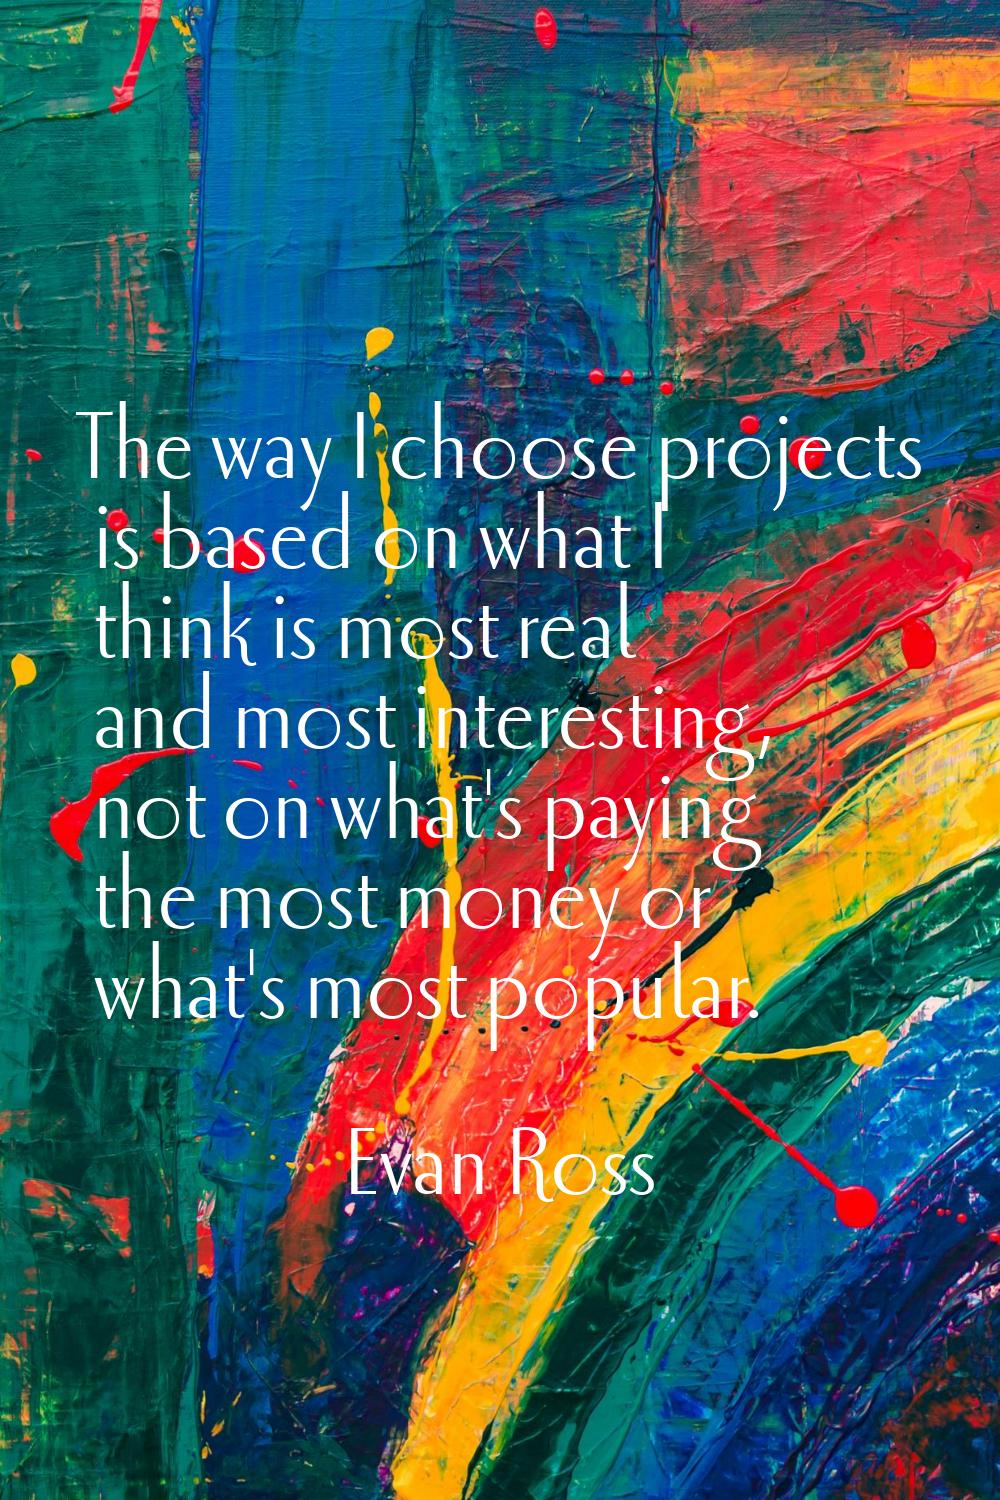 The way I choose projects is based on what I think is most real and most interesting, not on what's